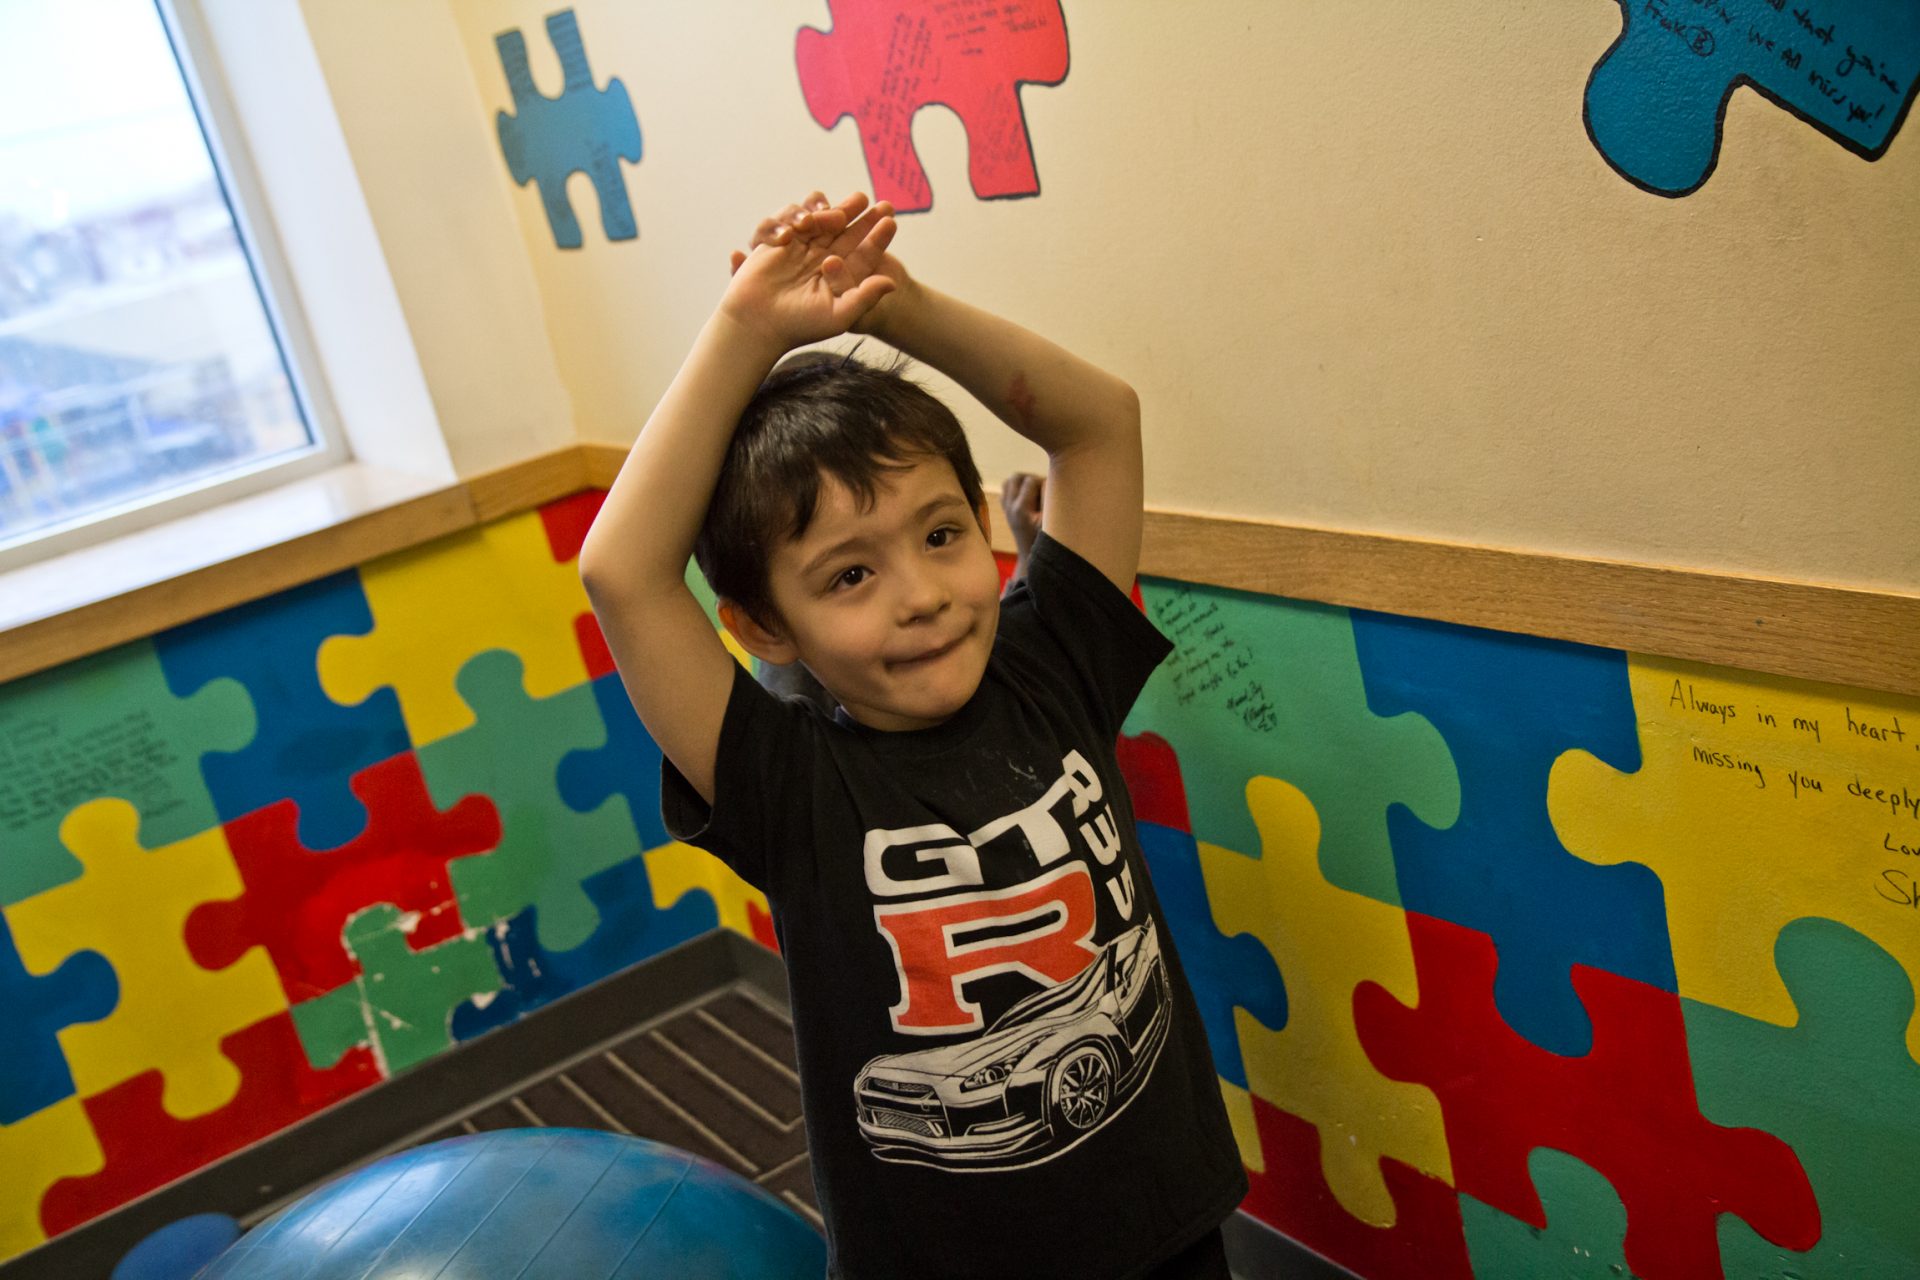 Kids in SPIN’s autism support preschool classroom take a play break in the middle of the day.